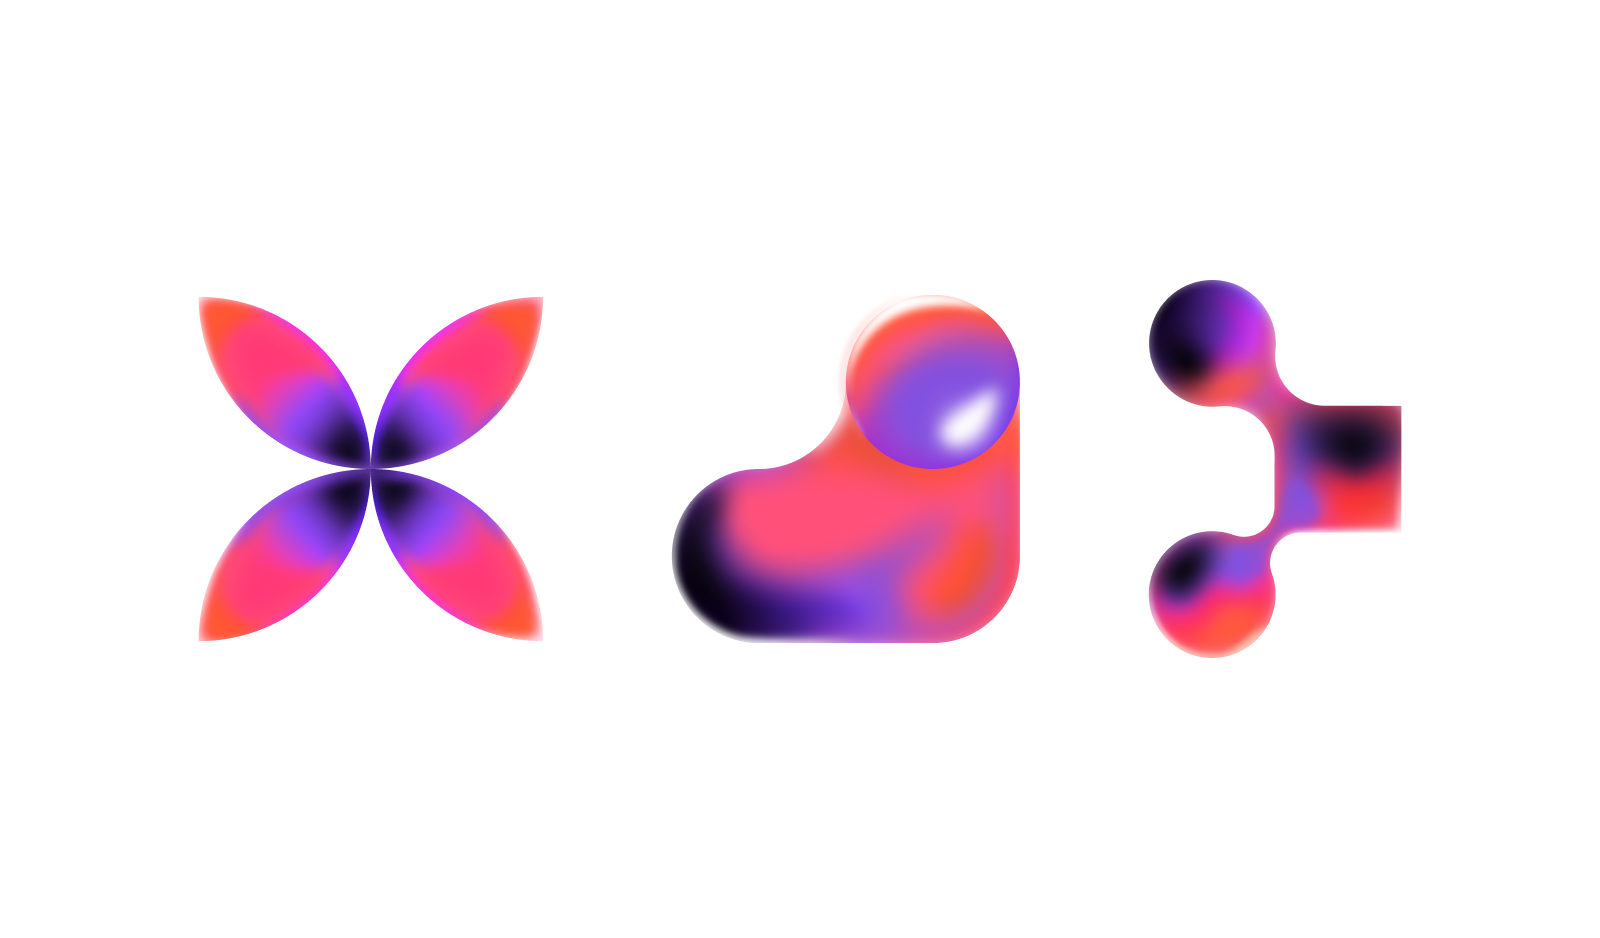 Three purple and pink abstract illustrations made up of shapes that overlap and gel together to communicate the concept of collaboration